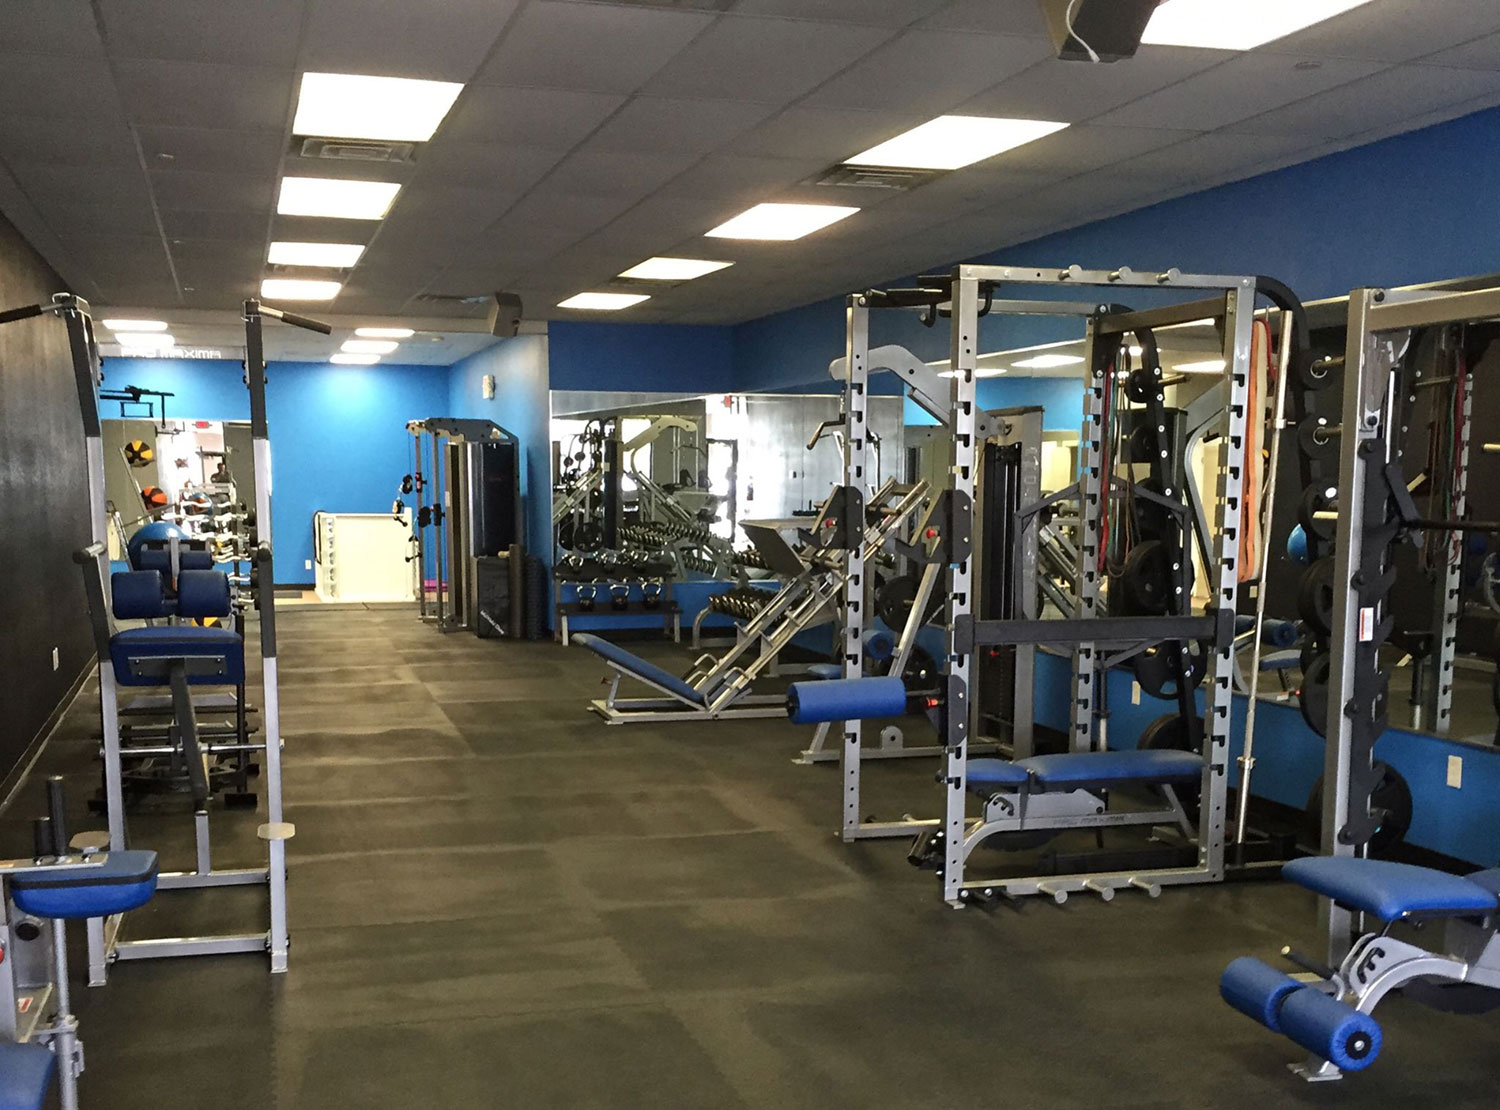 StrongFound Personal Training Gym - Pearland, TX